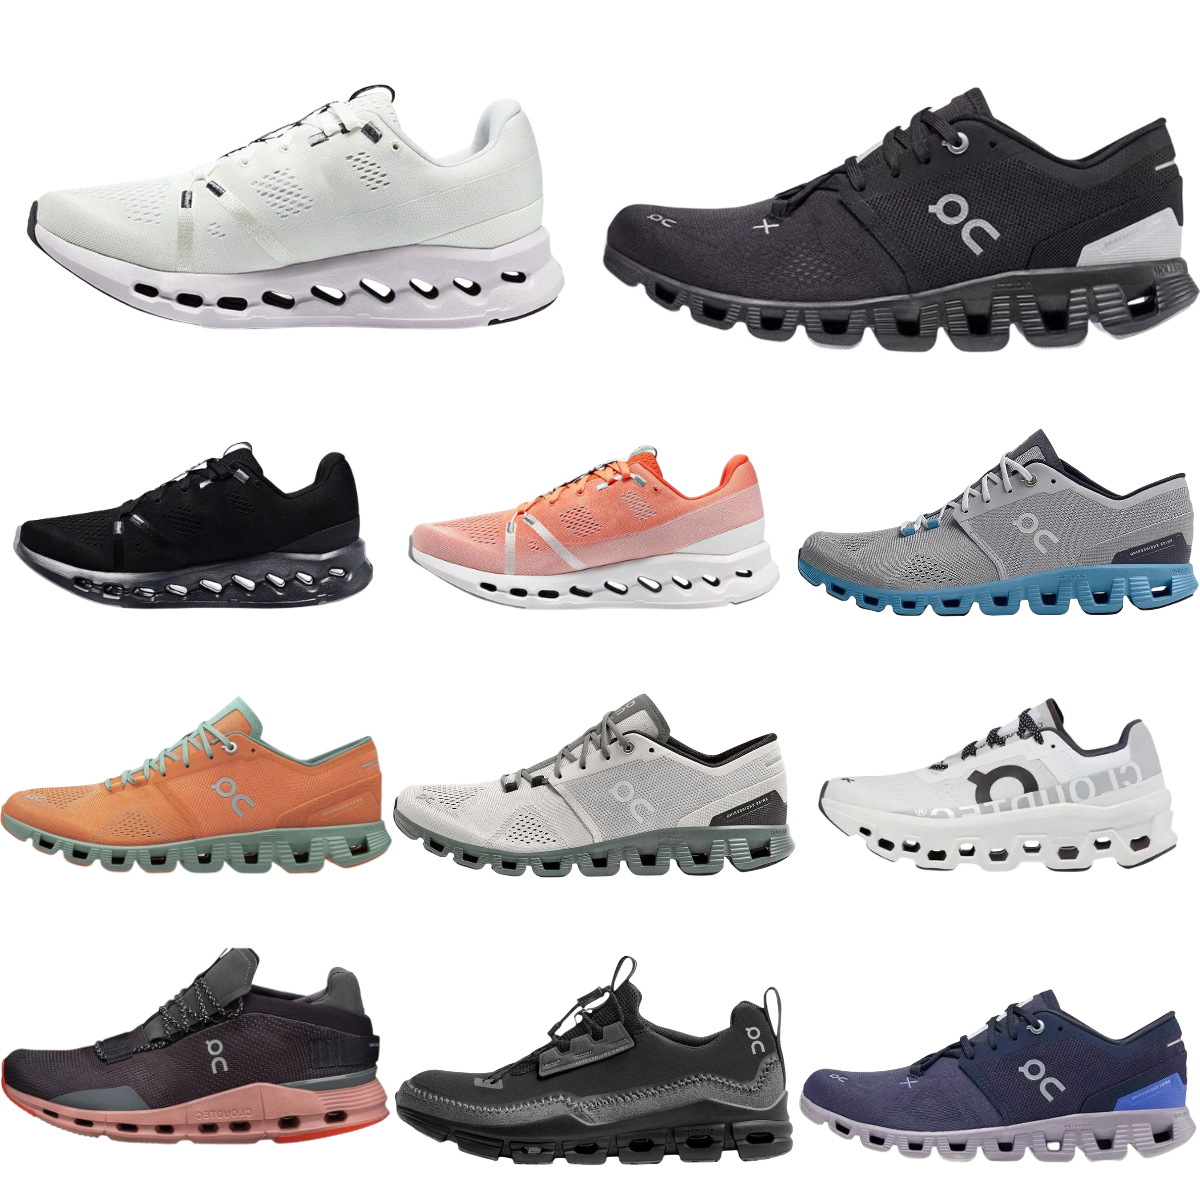 

Trainers On Cloud Running Shoes Mens Designer On Cloudnova Form Nova White Pearl X 3 Cloudmonster Monster Runner Surfer Workout And Cross Men Women Sports Sneakers, Please contact us